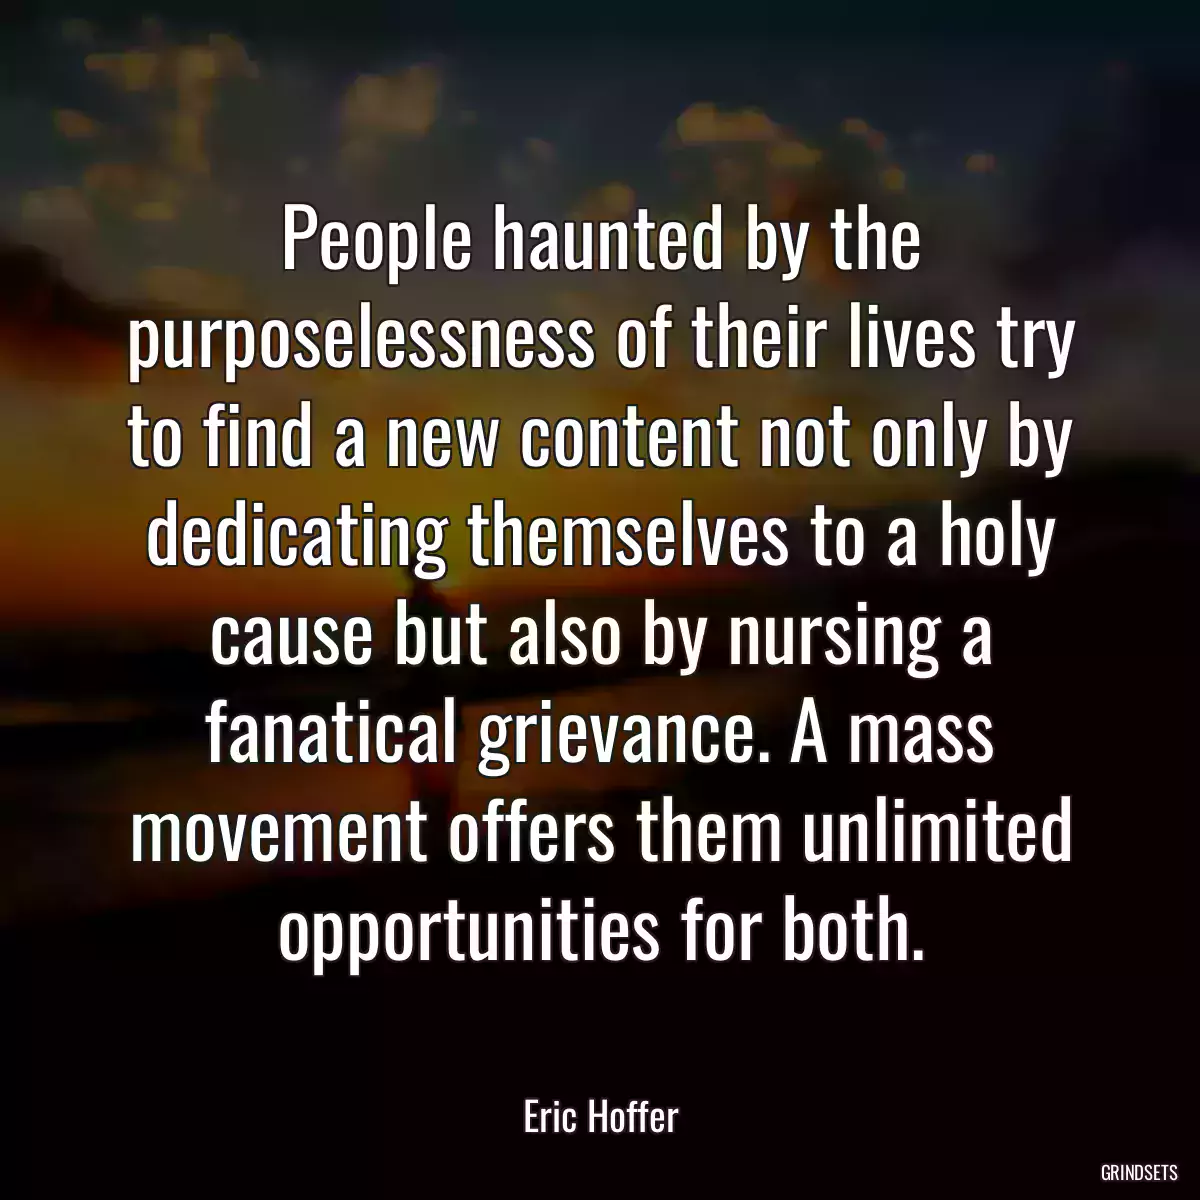 People haunted by the purposelessness of their lives try to find a new content not only by dedicating themselves to a holy cause but also by nursing a fanatical grievance. A mass movement offers them unlimited opportunities for both.